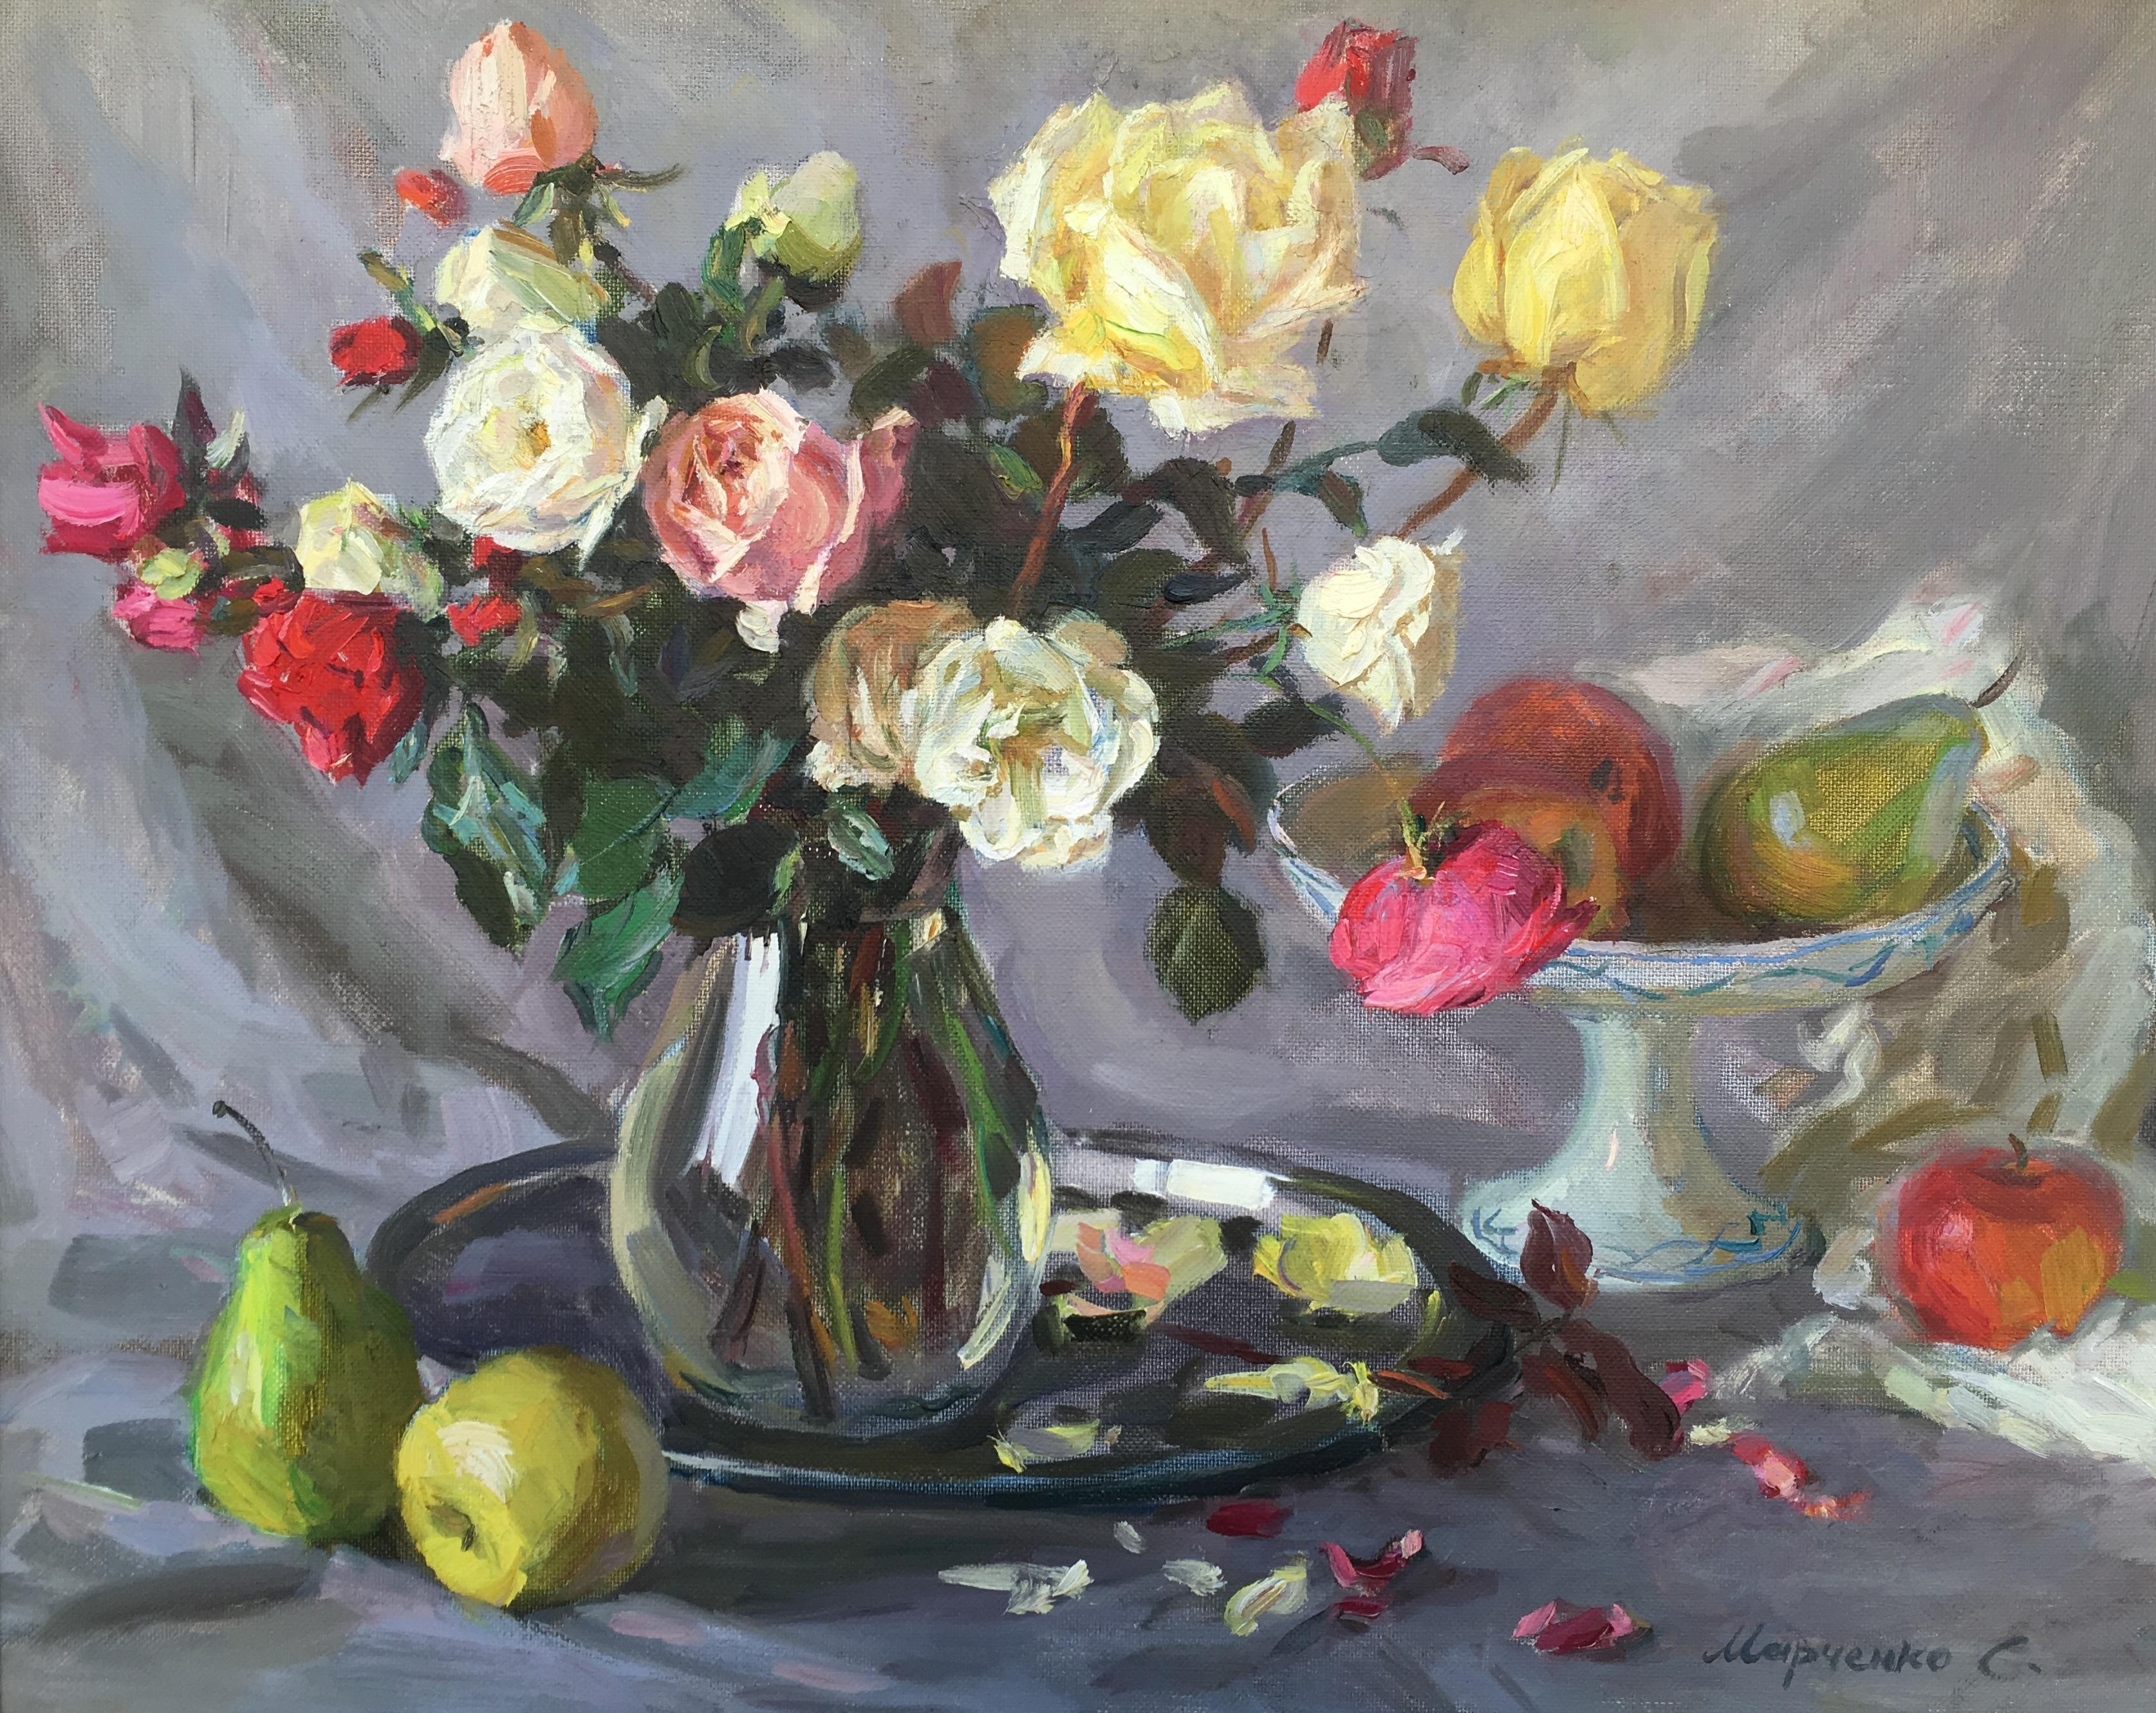 Roses and fruits, Marchenko oil on canvas post-impressionist still-life